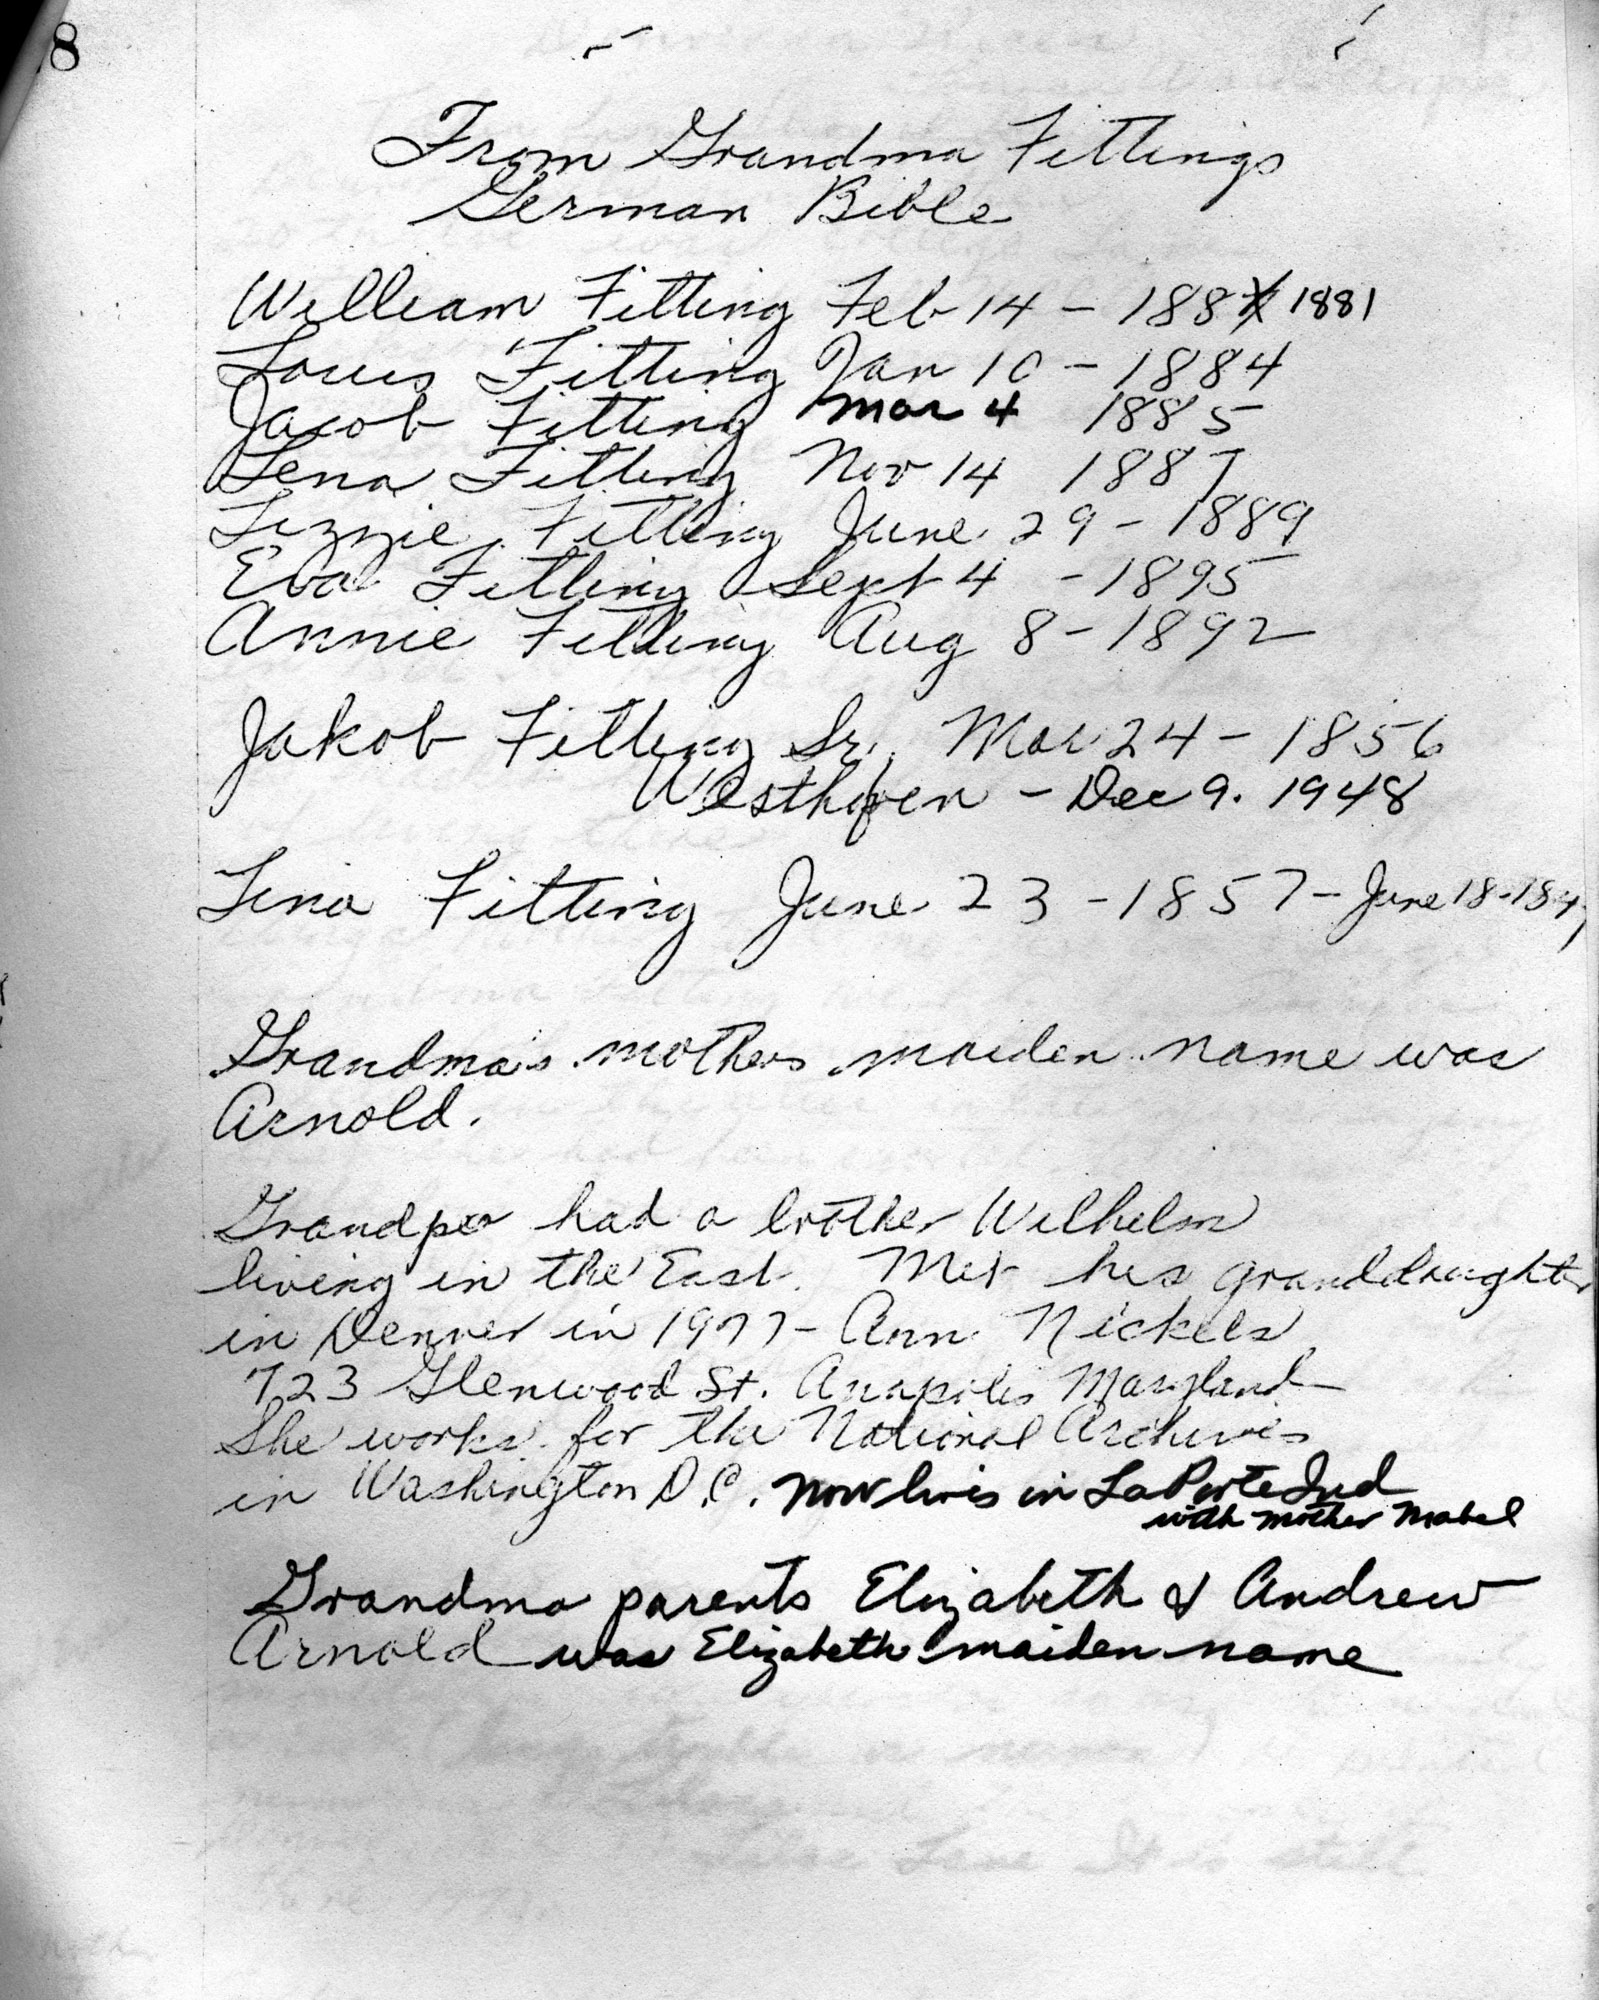 Dauth Family Archive - Elizabeth Fitting Family History Page 14